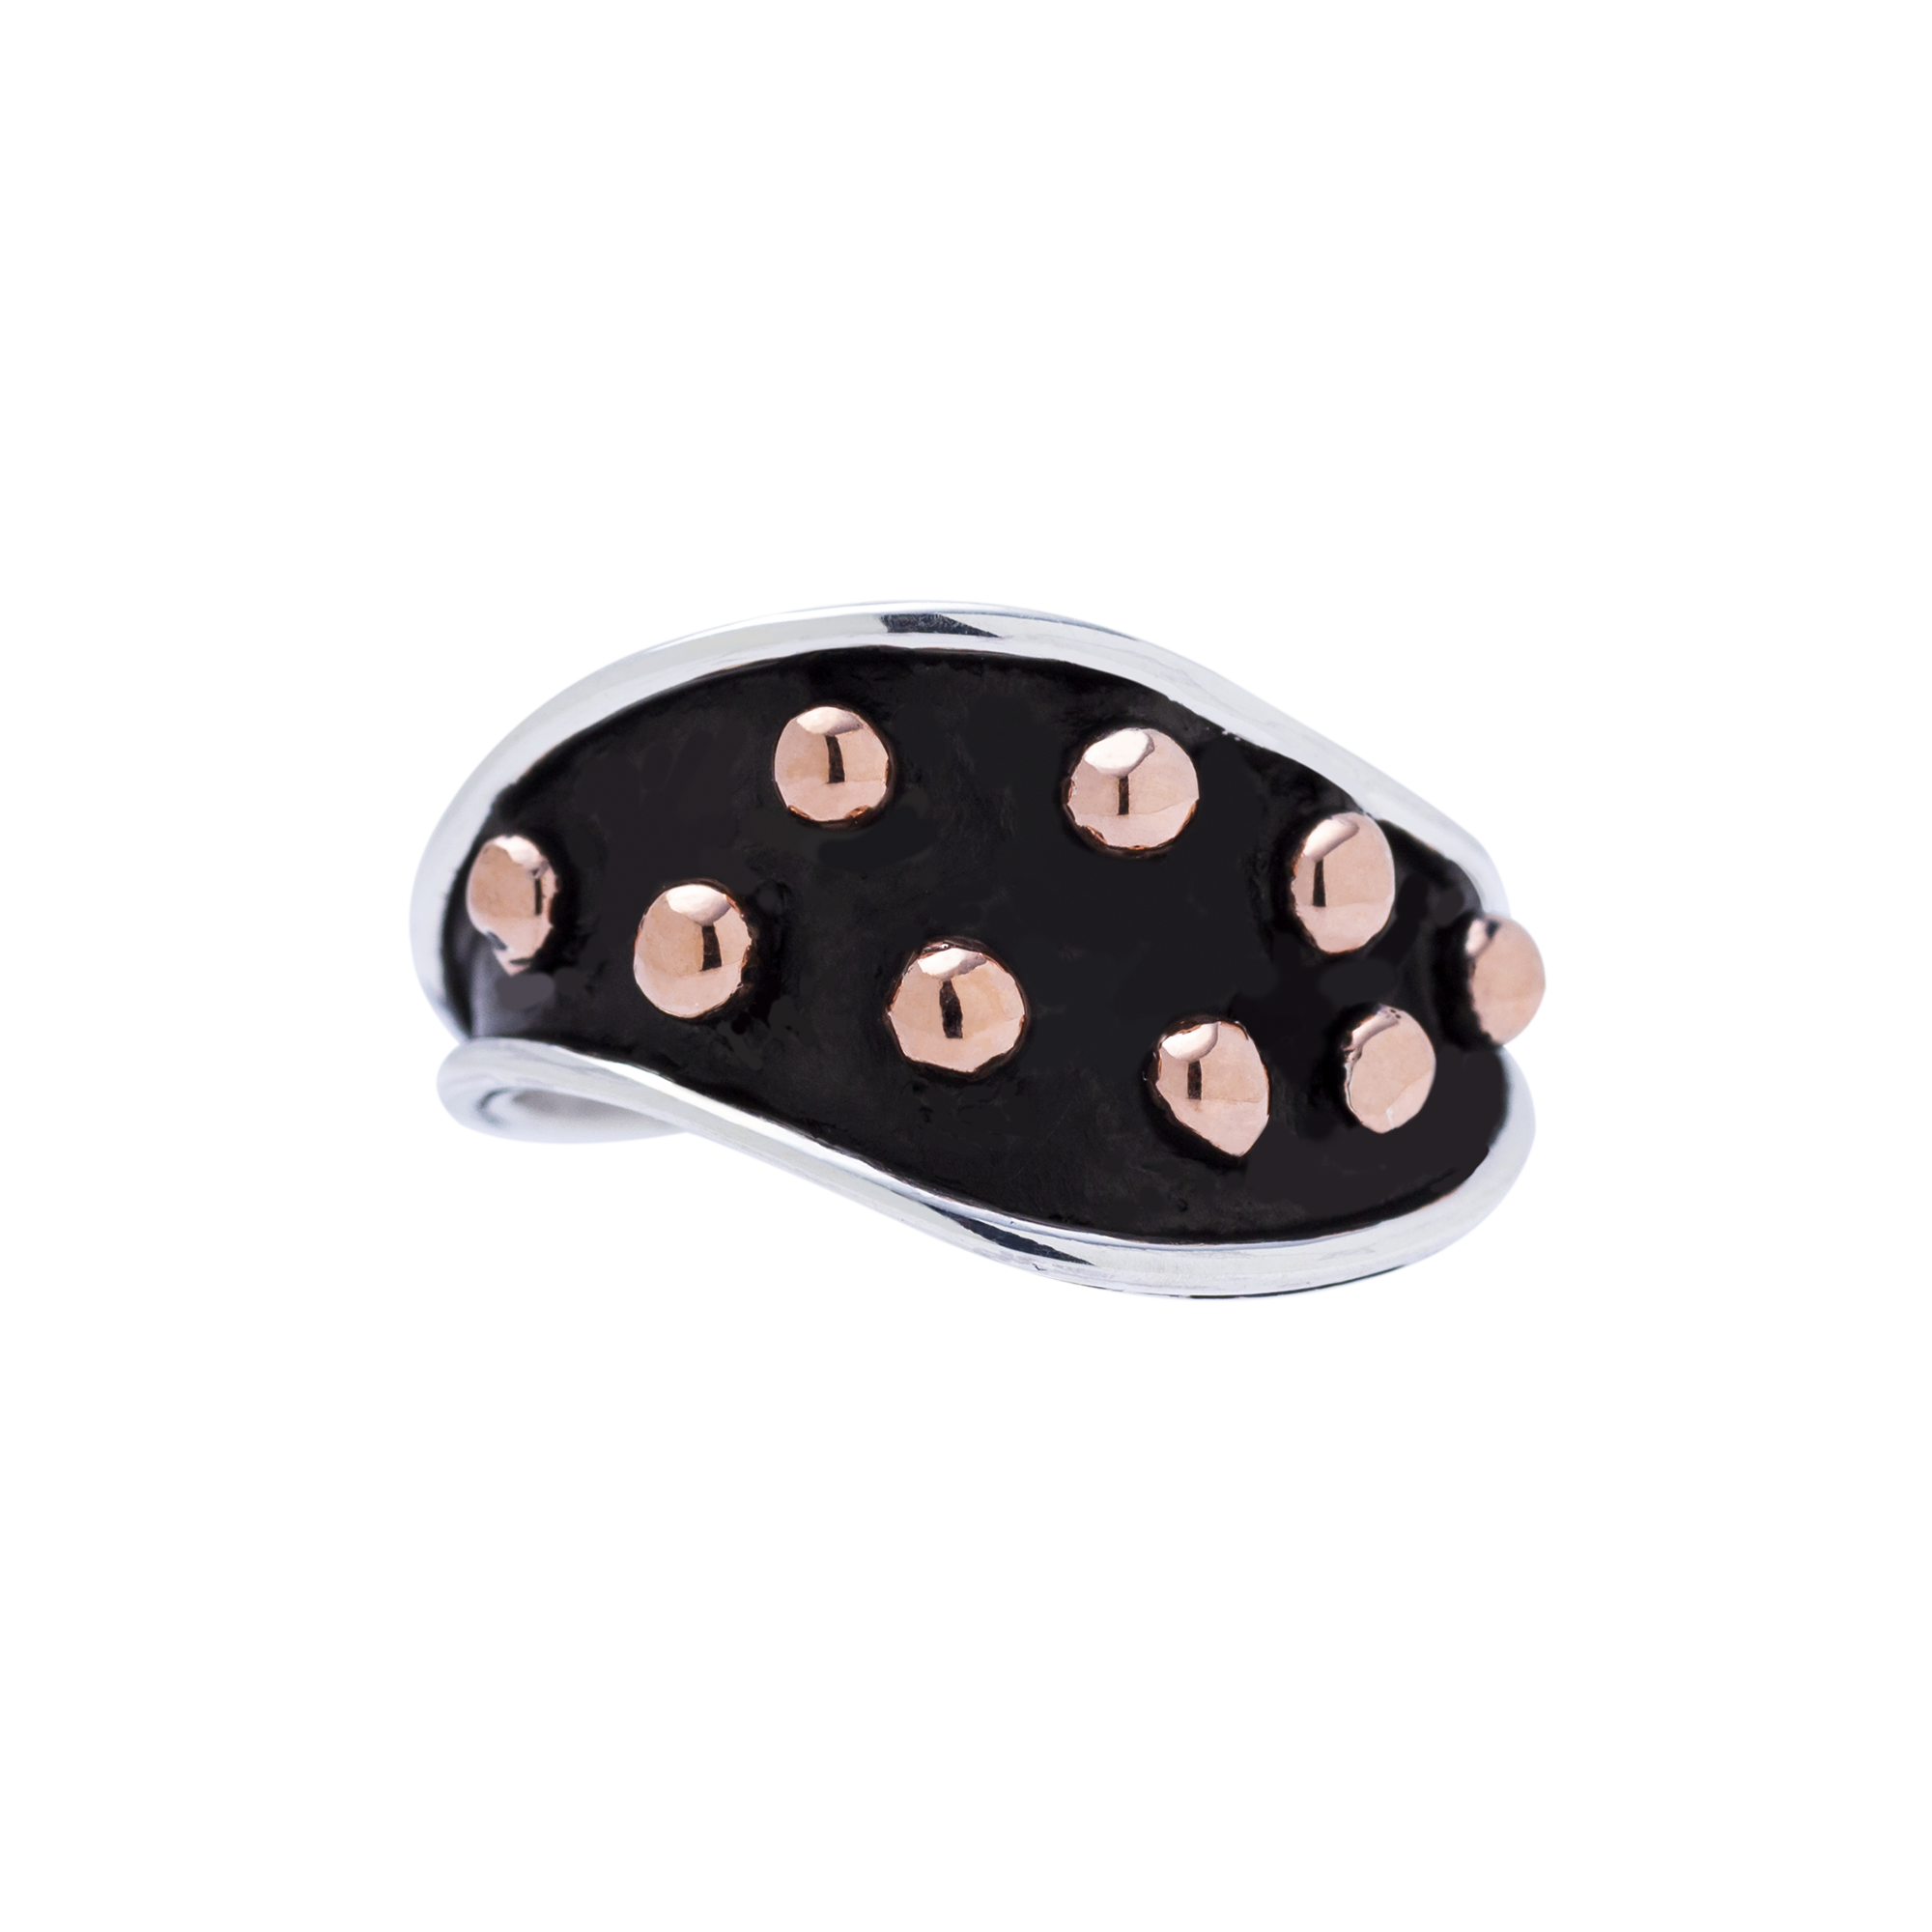 RG.VIC.2053 - Sterling Silver and Copper Ring